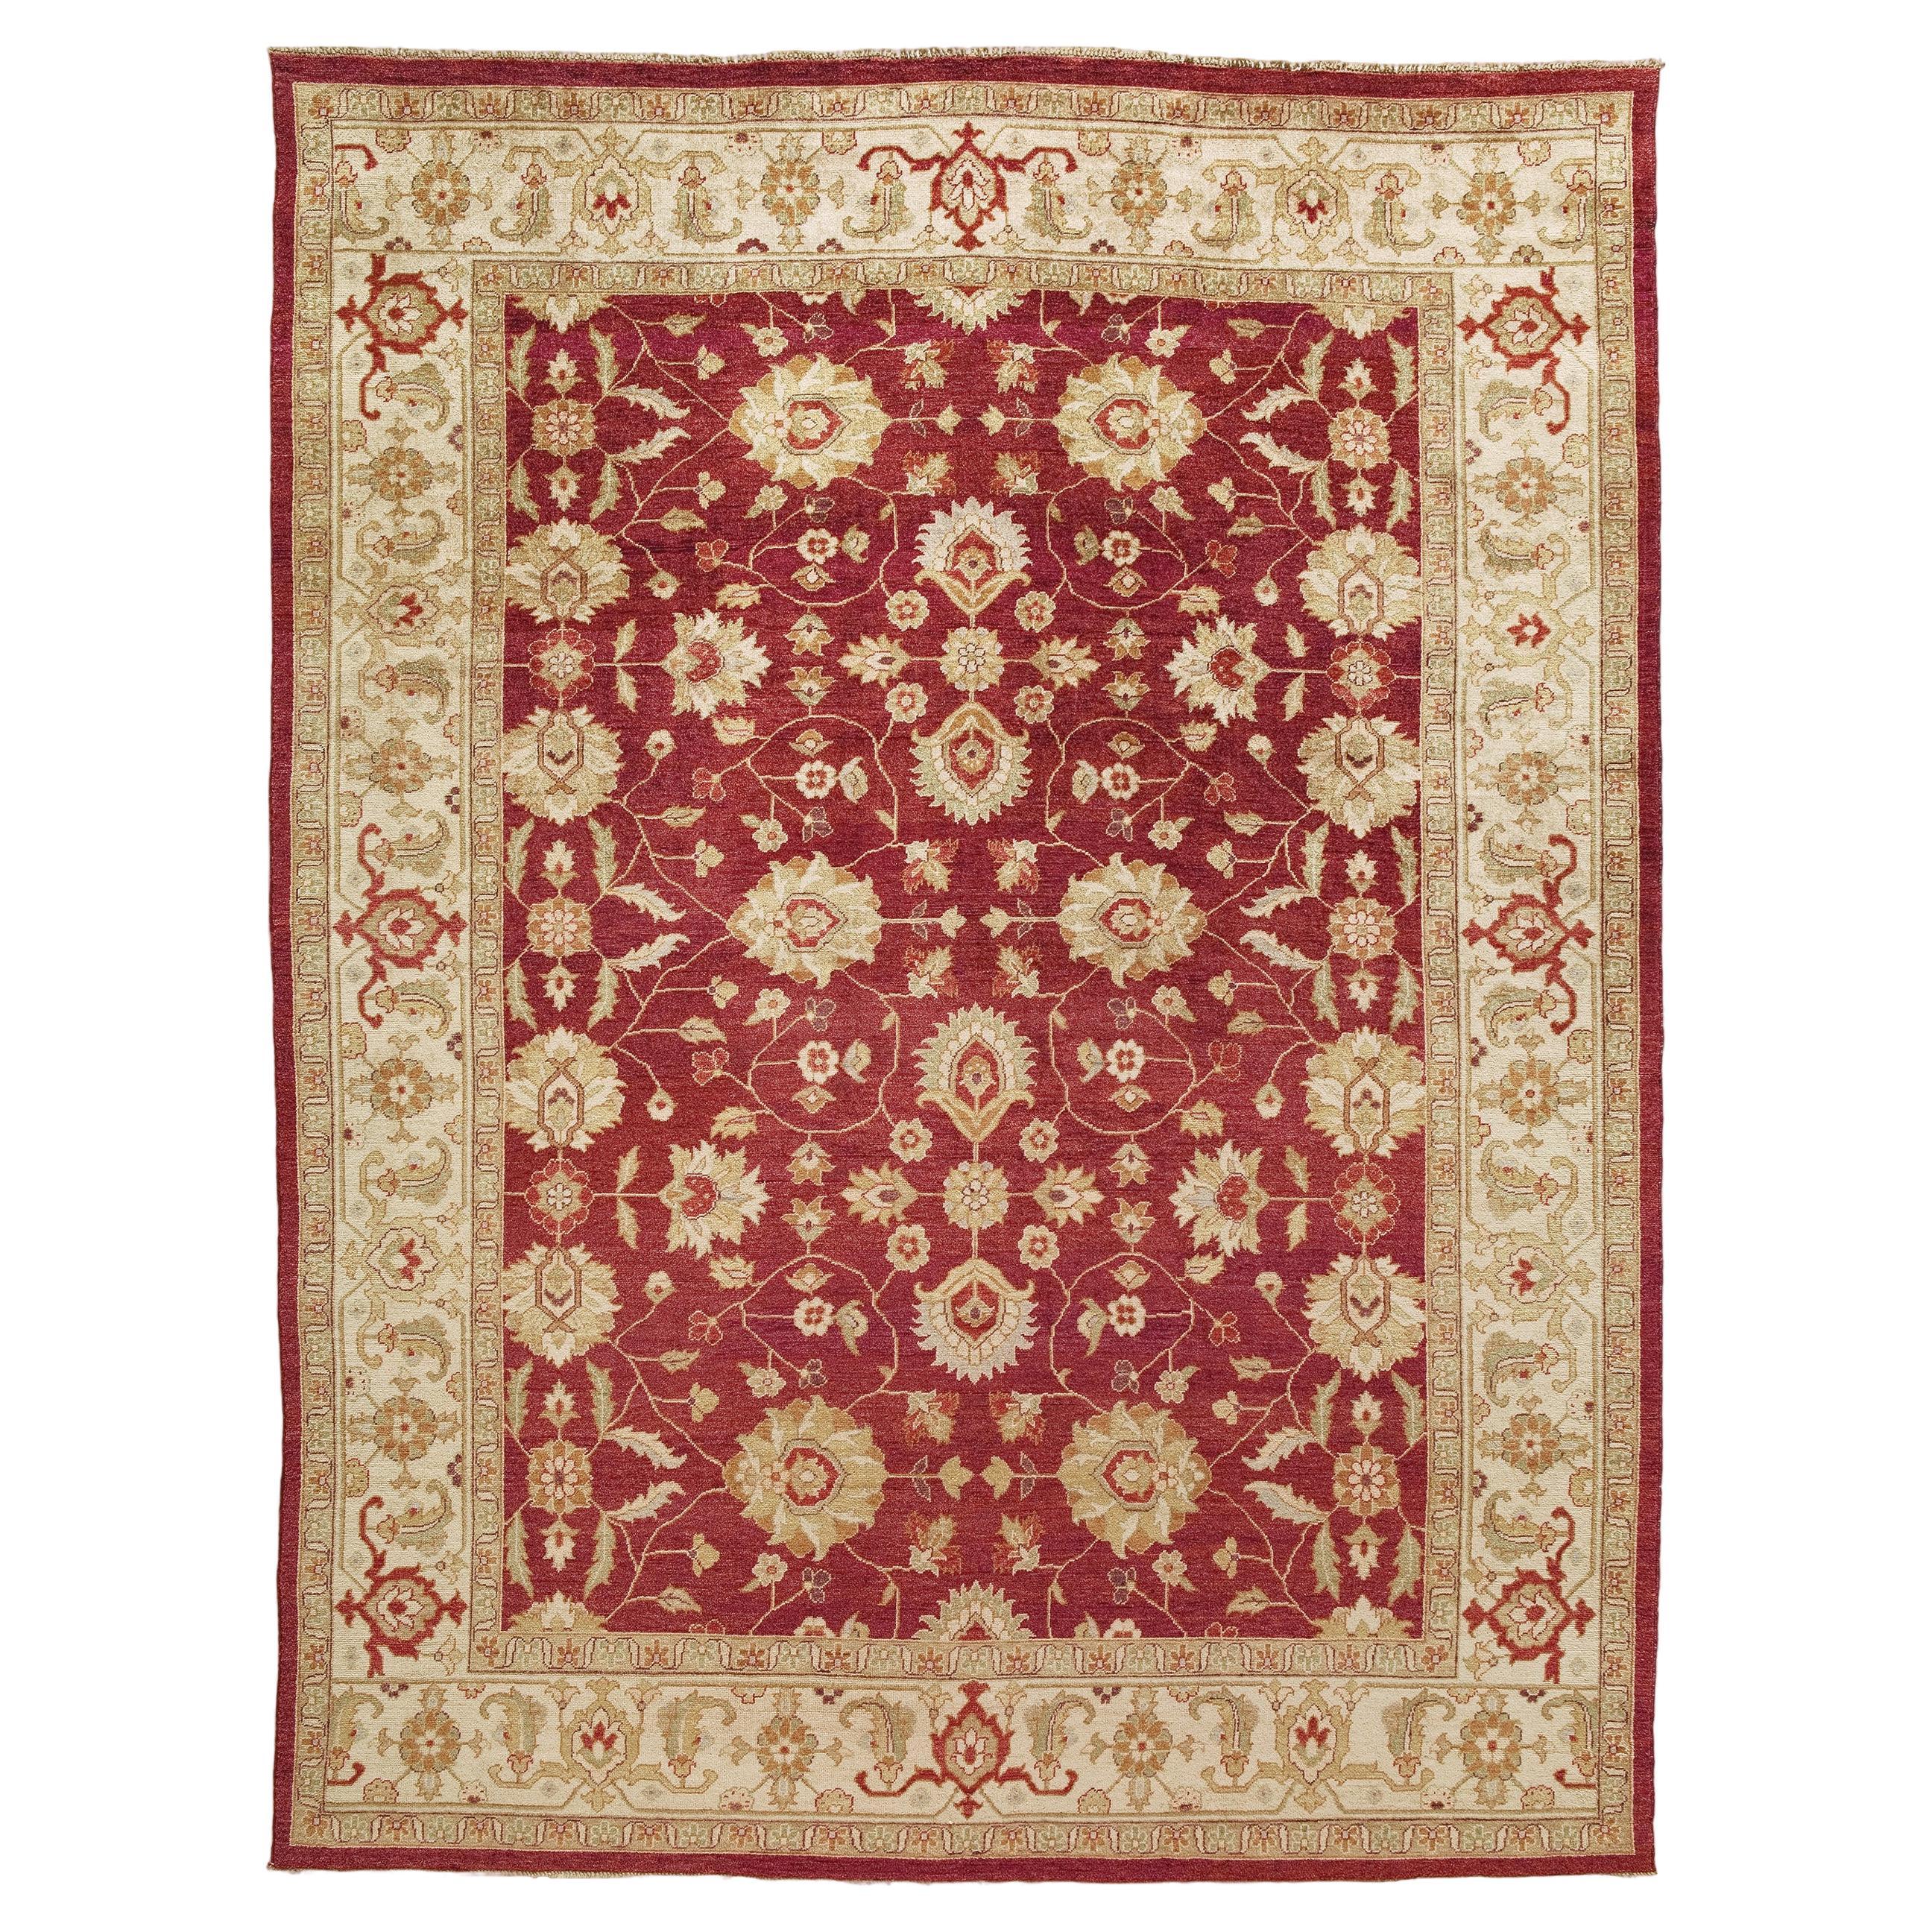 Luxury Traditional Hand-Knotted Lilihan Red and Cream 12x15 Rug